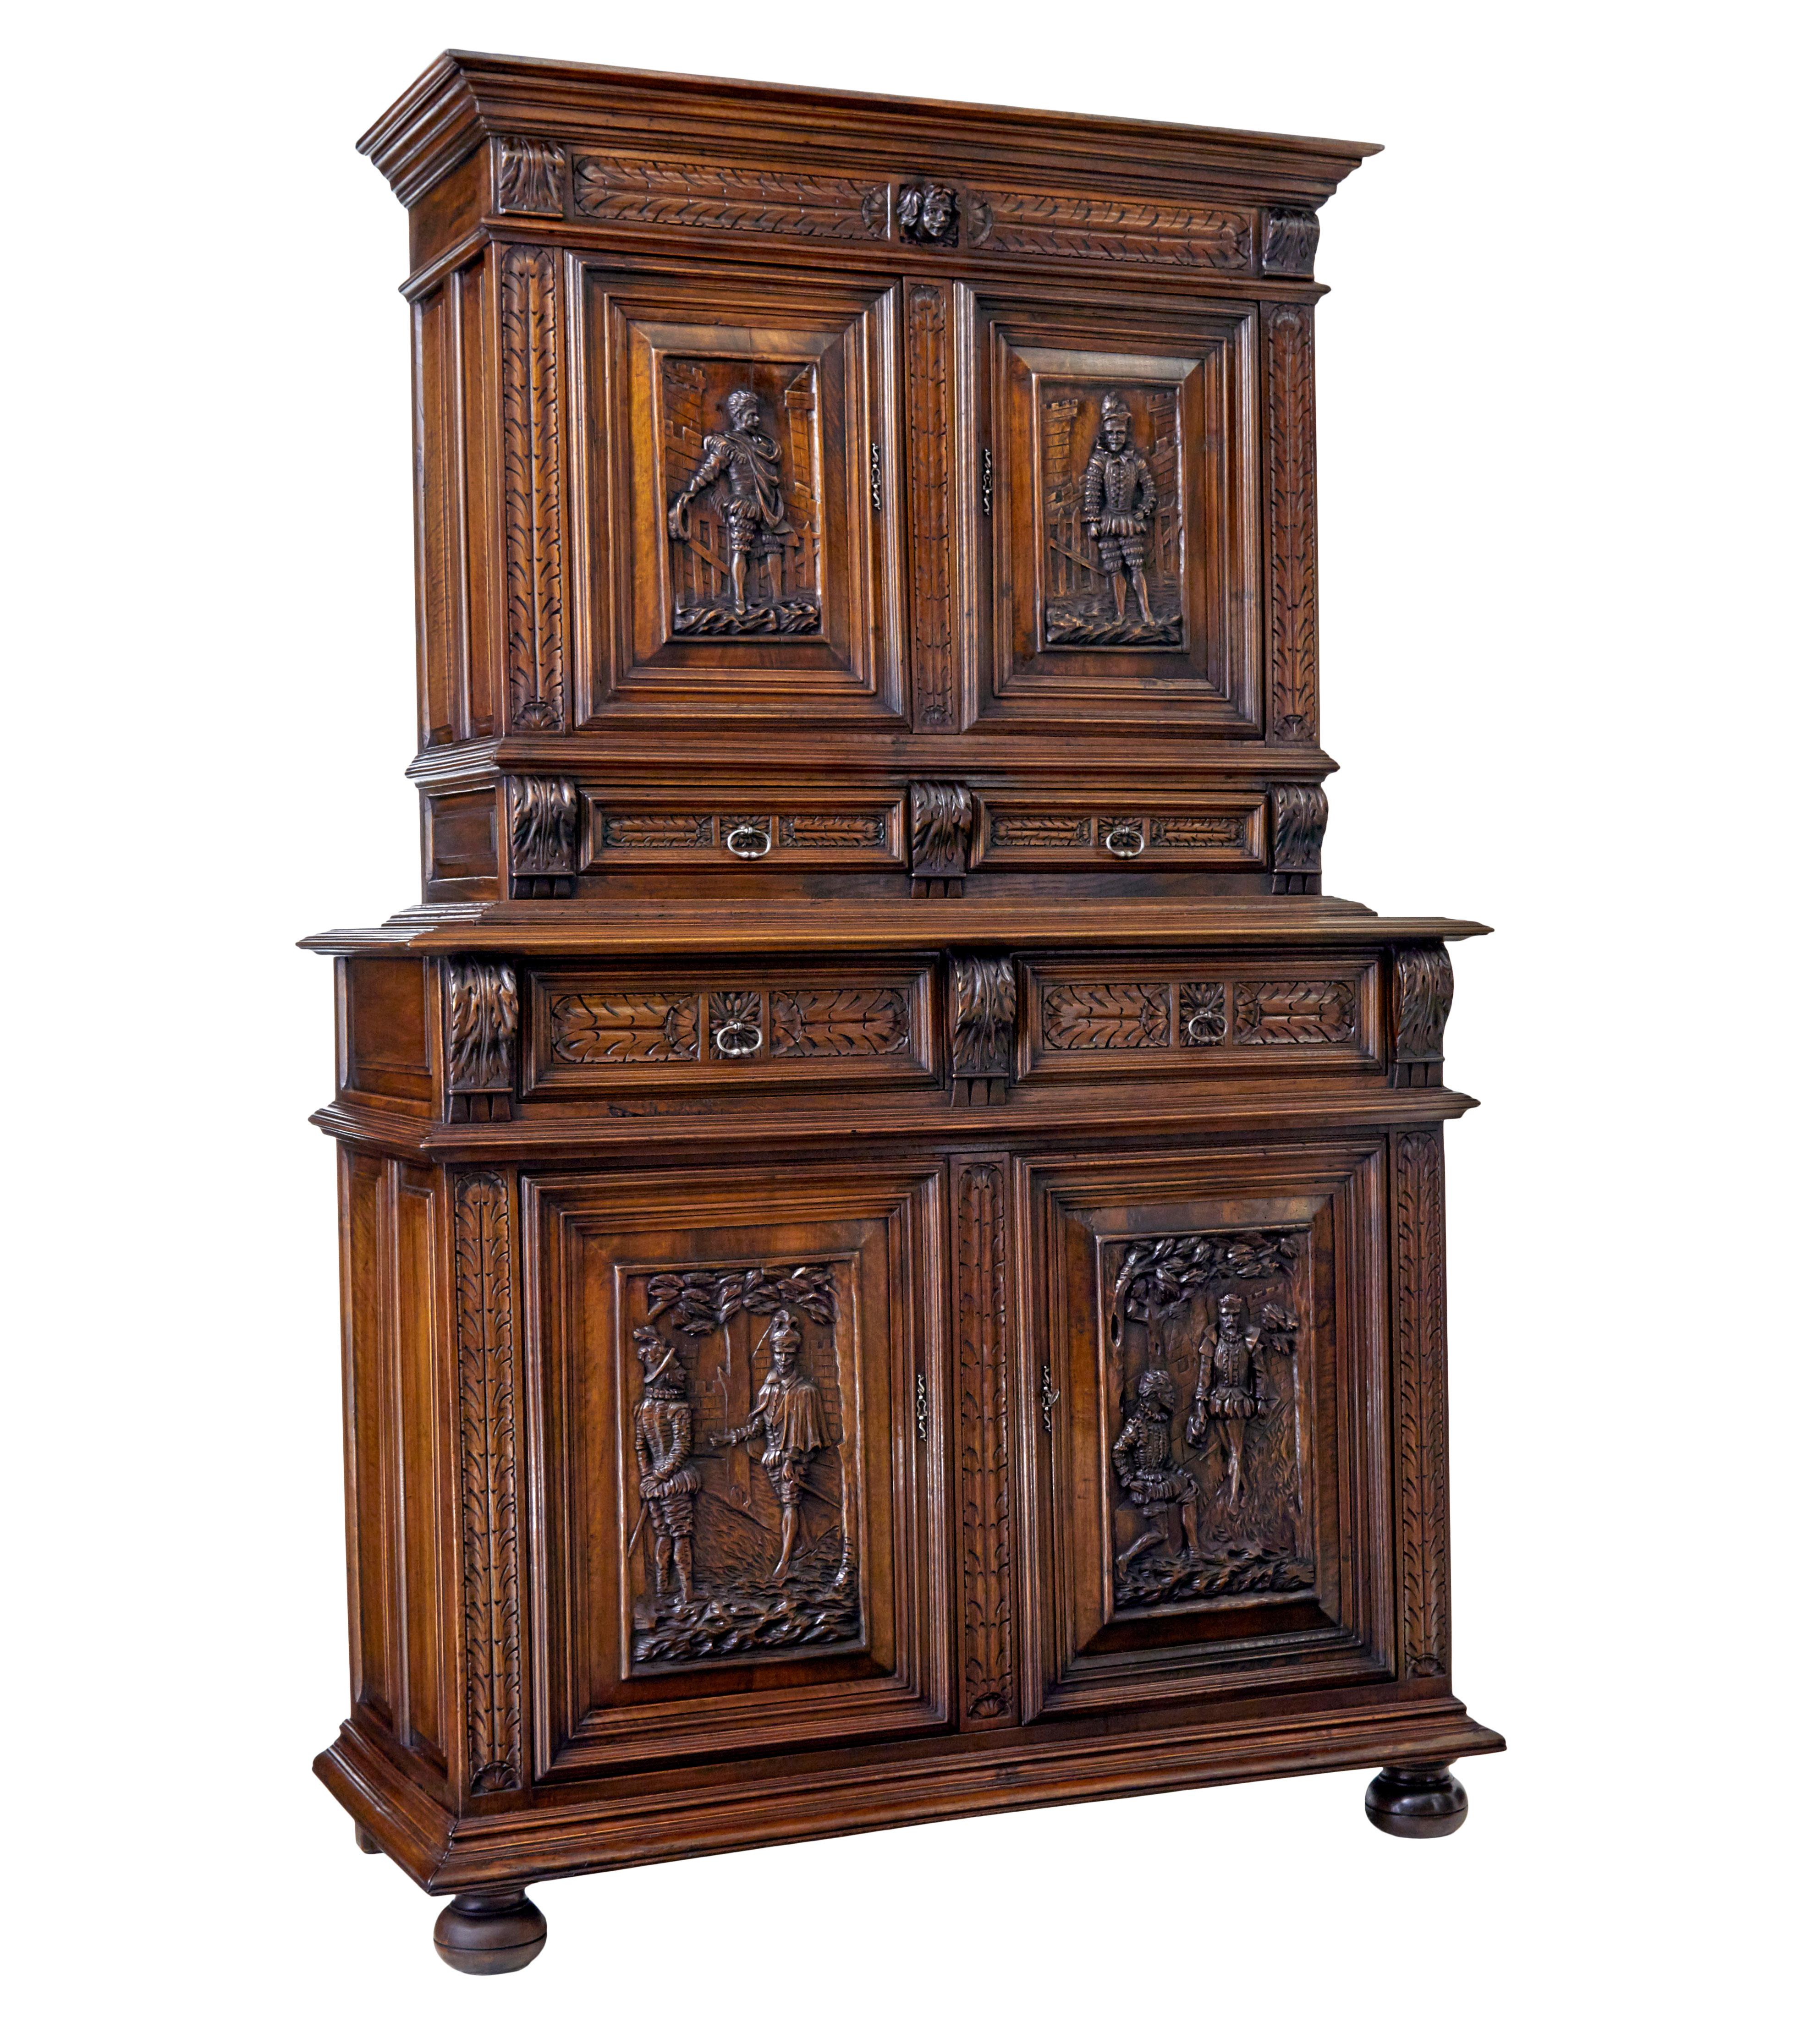 Good quality carved italian two part cabinet cupboard, circa 1850.

Beautifully carved in walnut, with good colour and patina.

Features four carved panels on the doors of Spanish gentlemen in 16th century dress, further carved decoration with